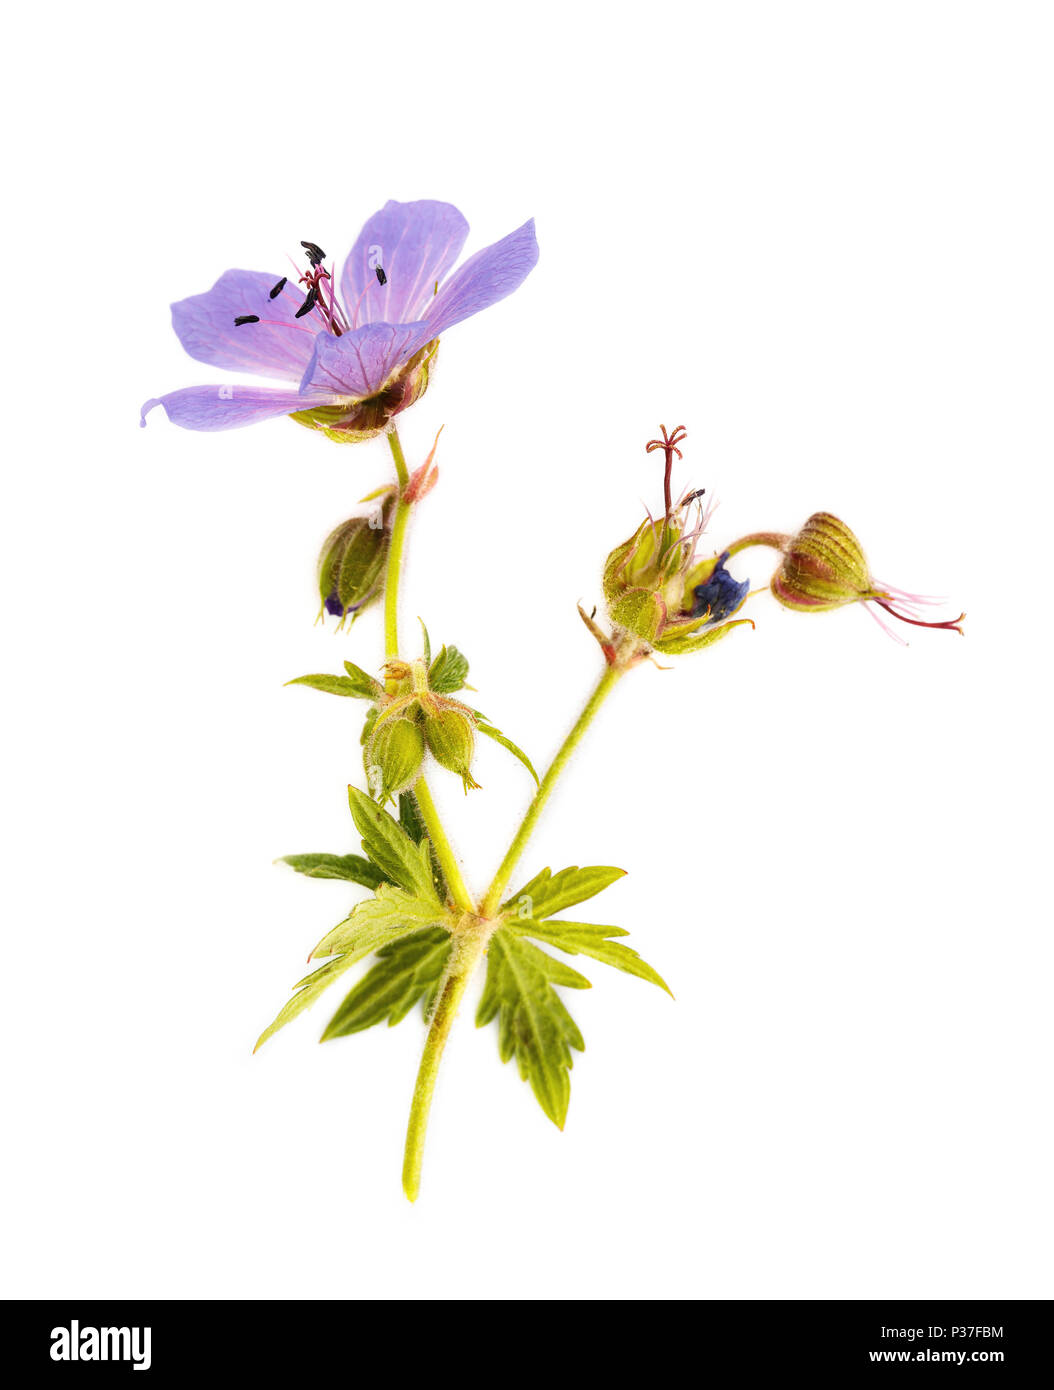 Geranium meadow. Branch isolated on white background. Wound healing plant Stock Photo